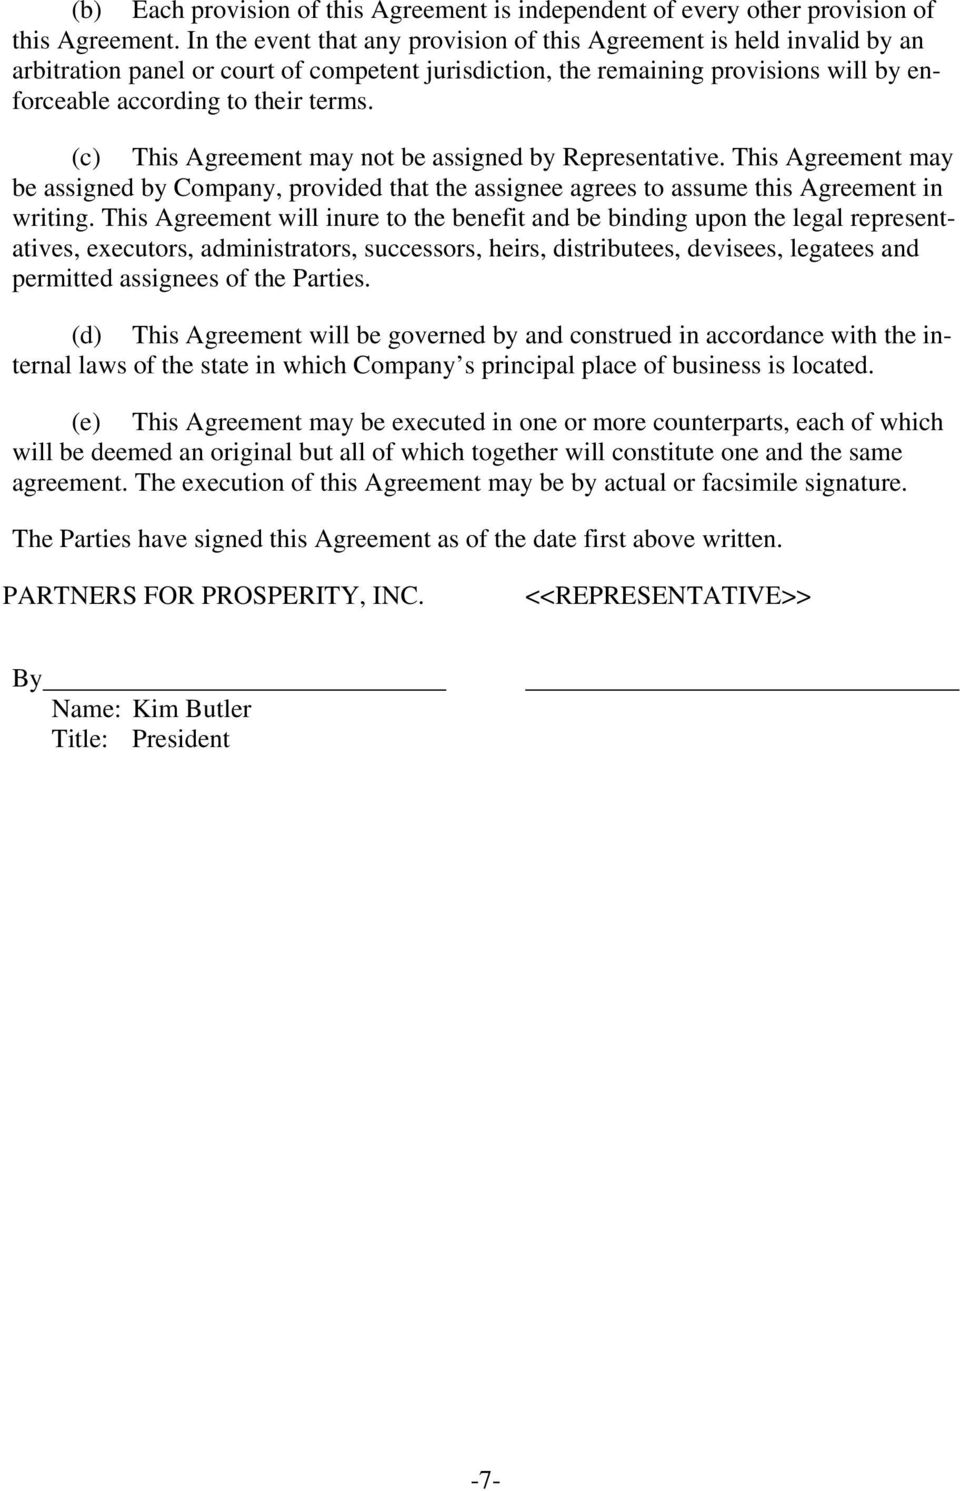 (c) This Agreement may not be assigned by Representative. This Agreement may be assigned by Company, provided that the assignee agrees to assume this Agreement in writing.